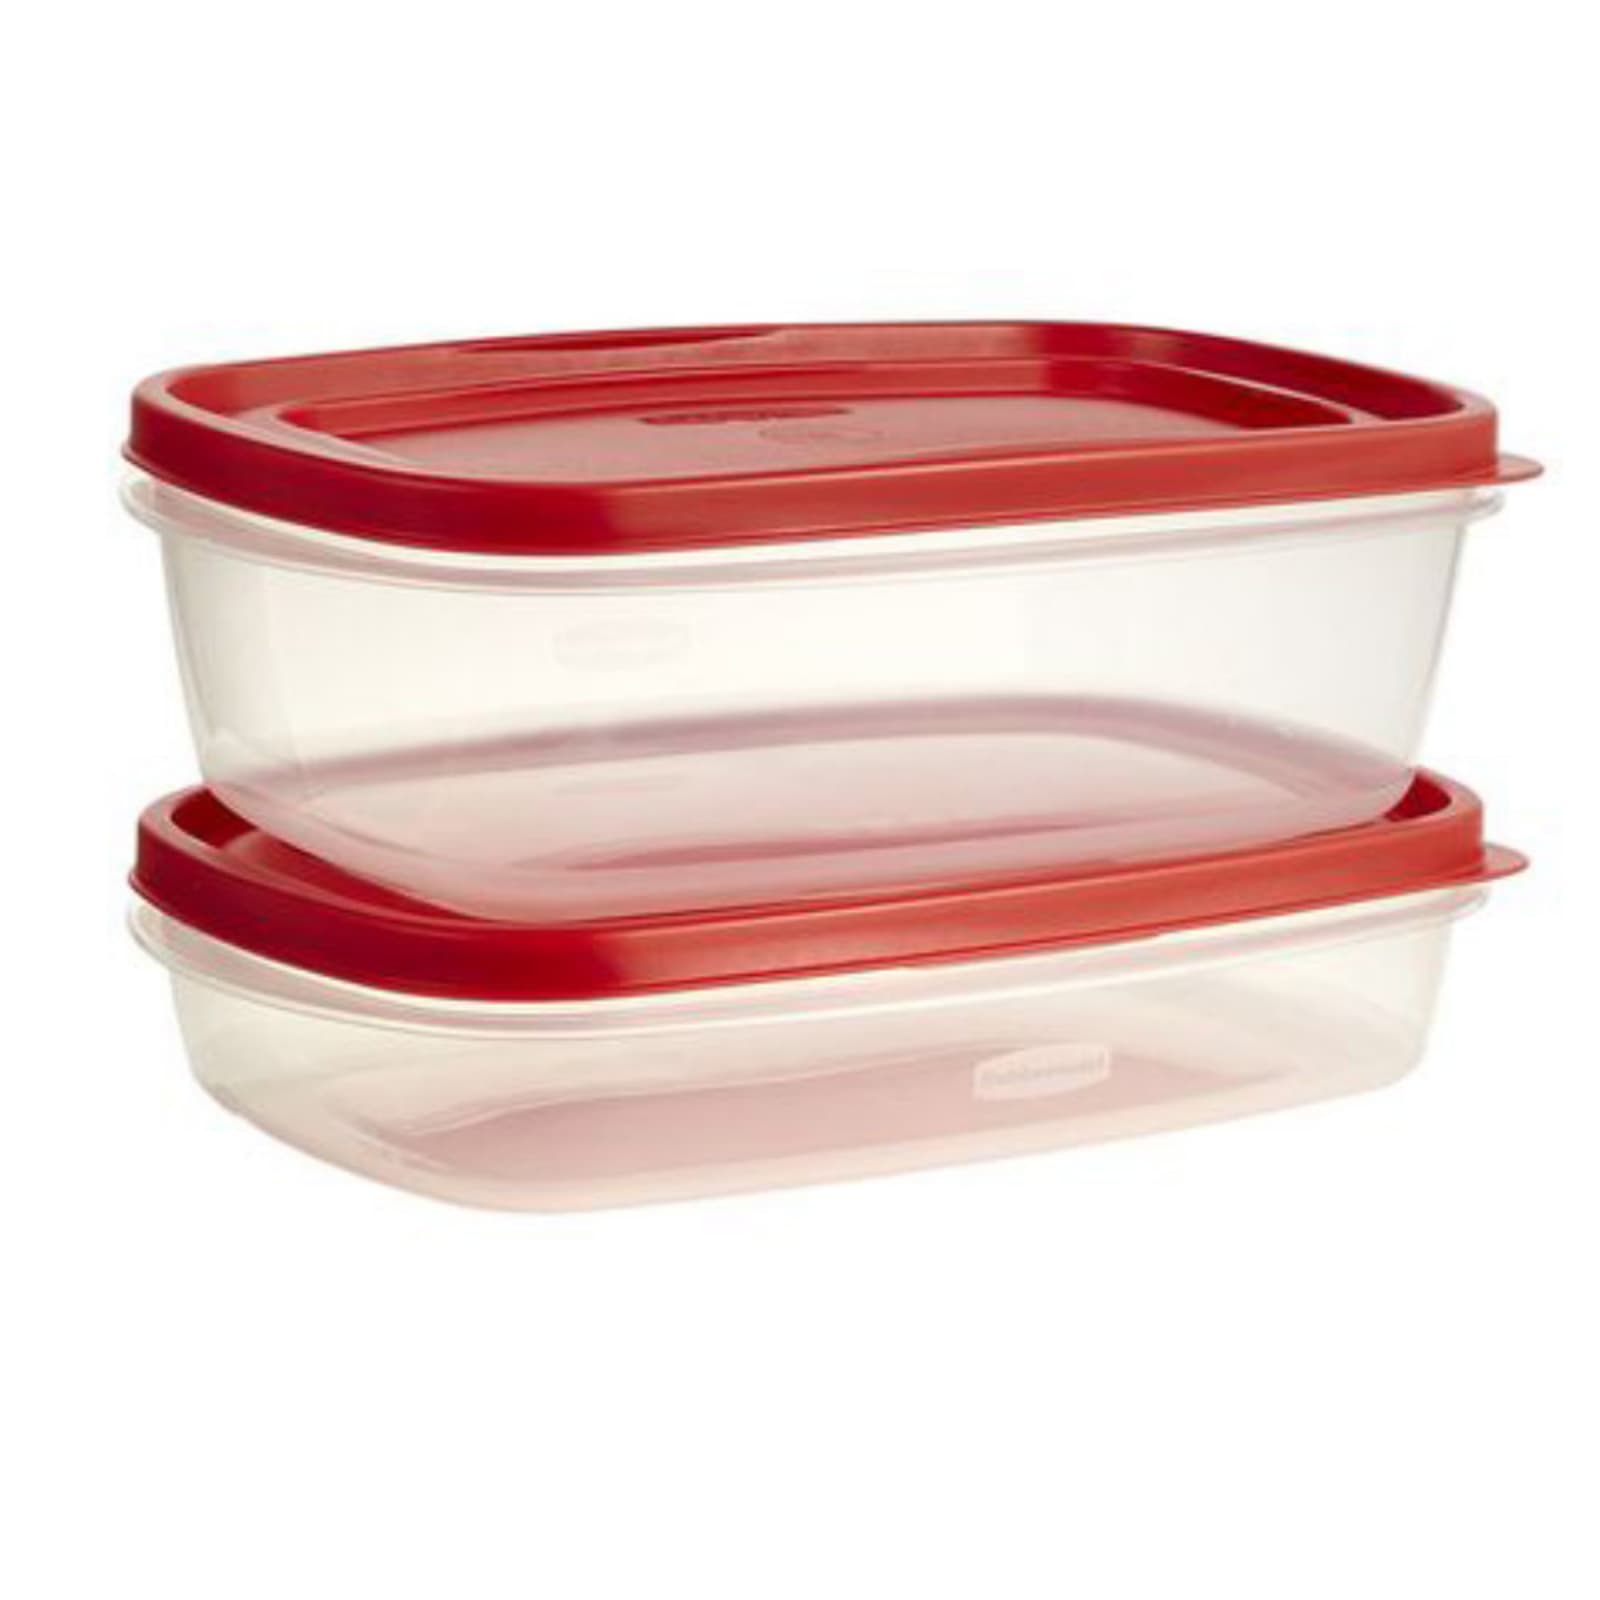 Rubbermaid Easy Find Lids Value Pack Container & Lid 5 Cup